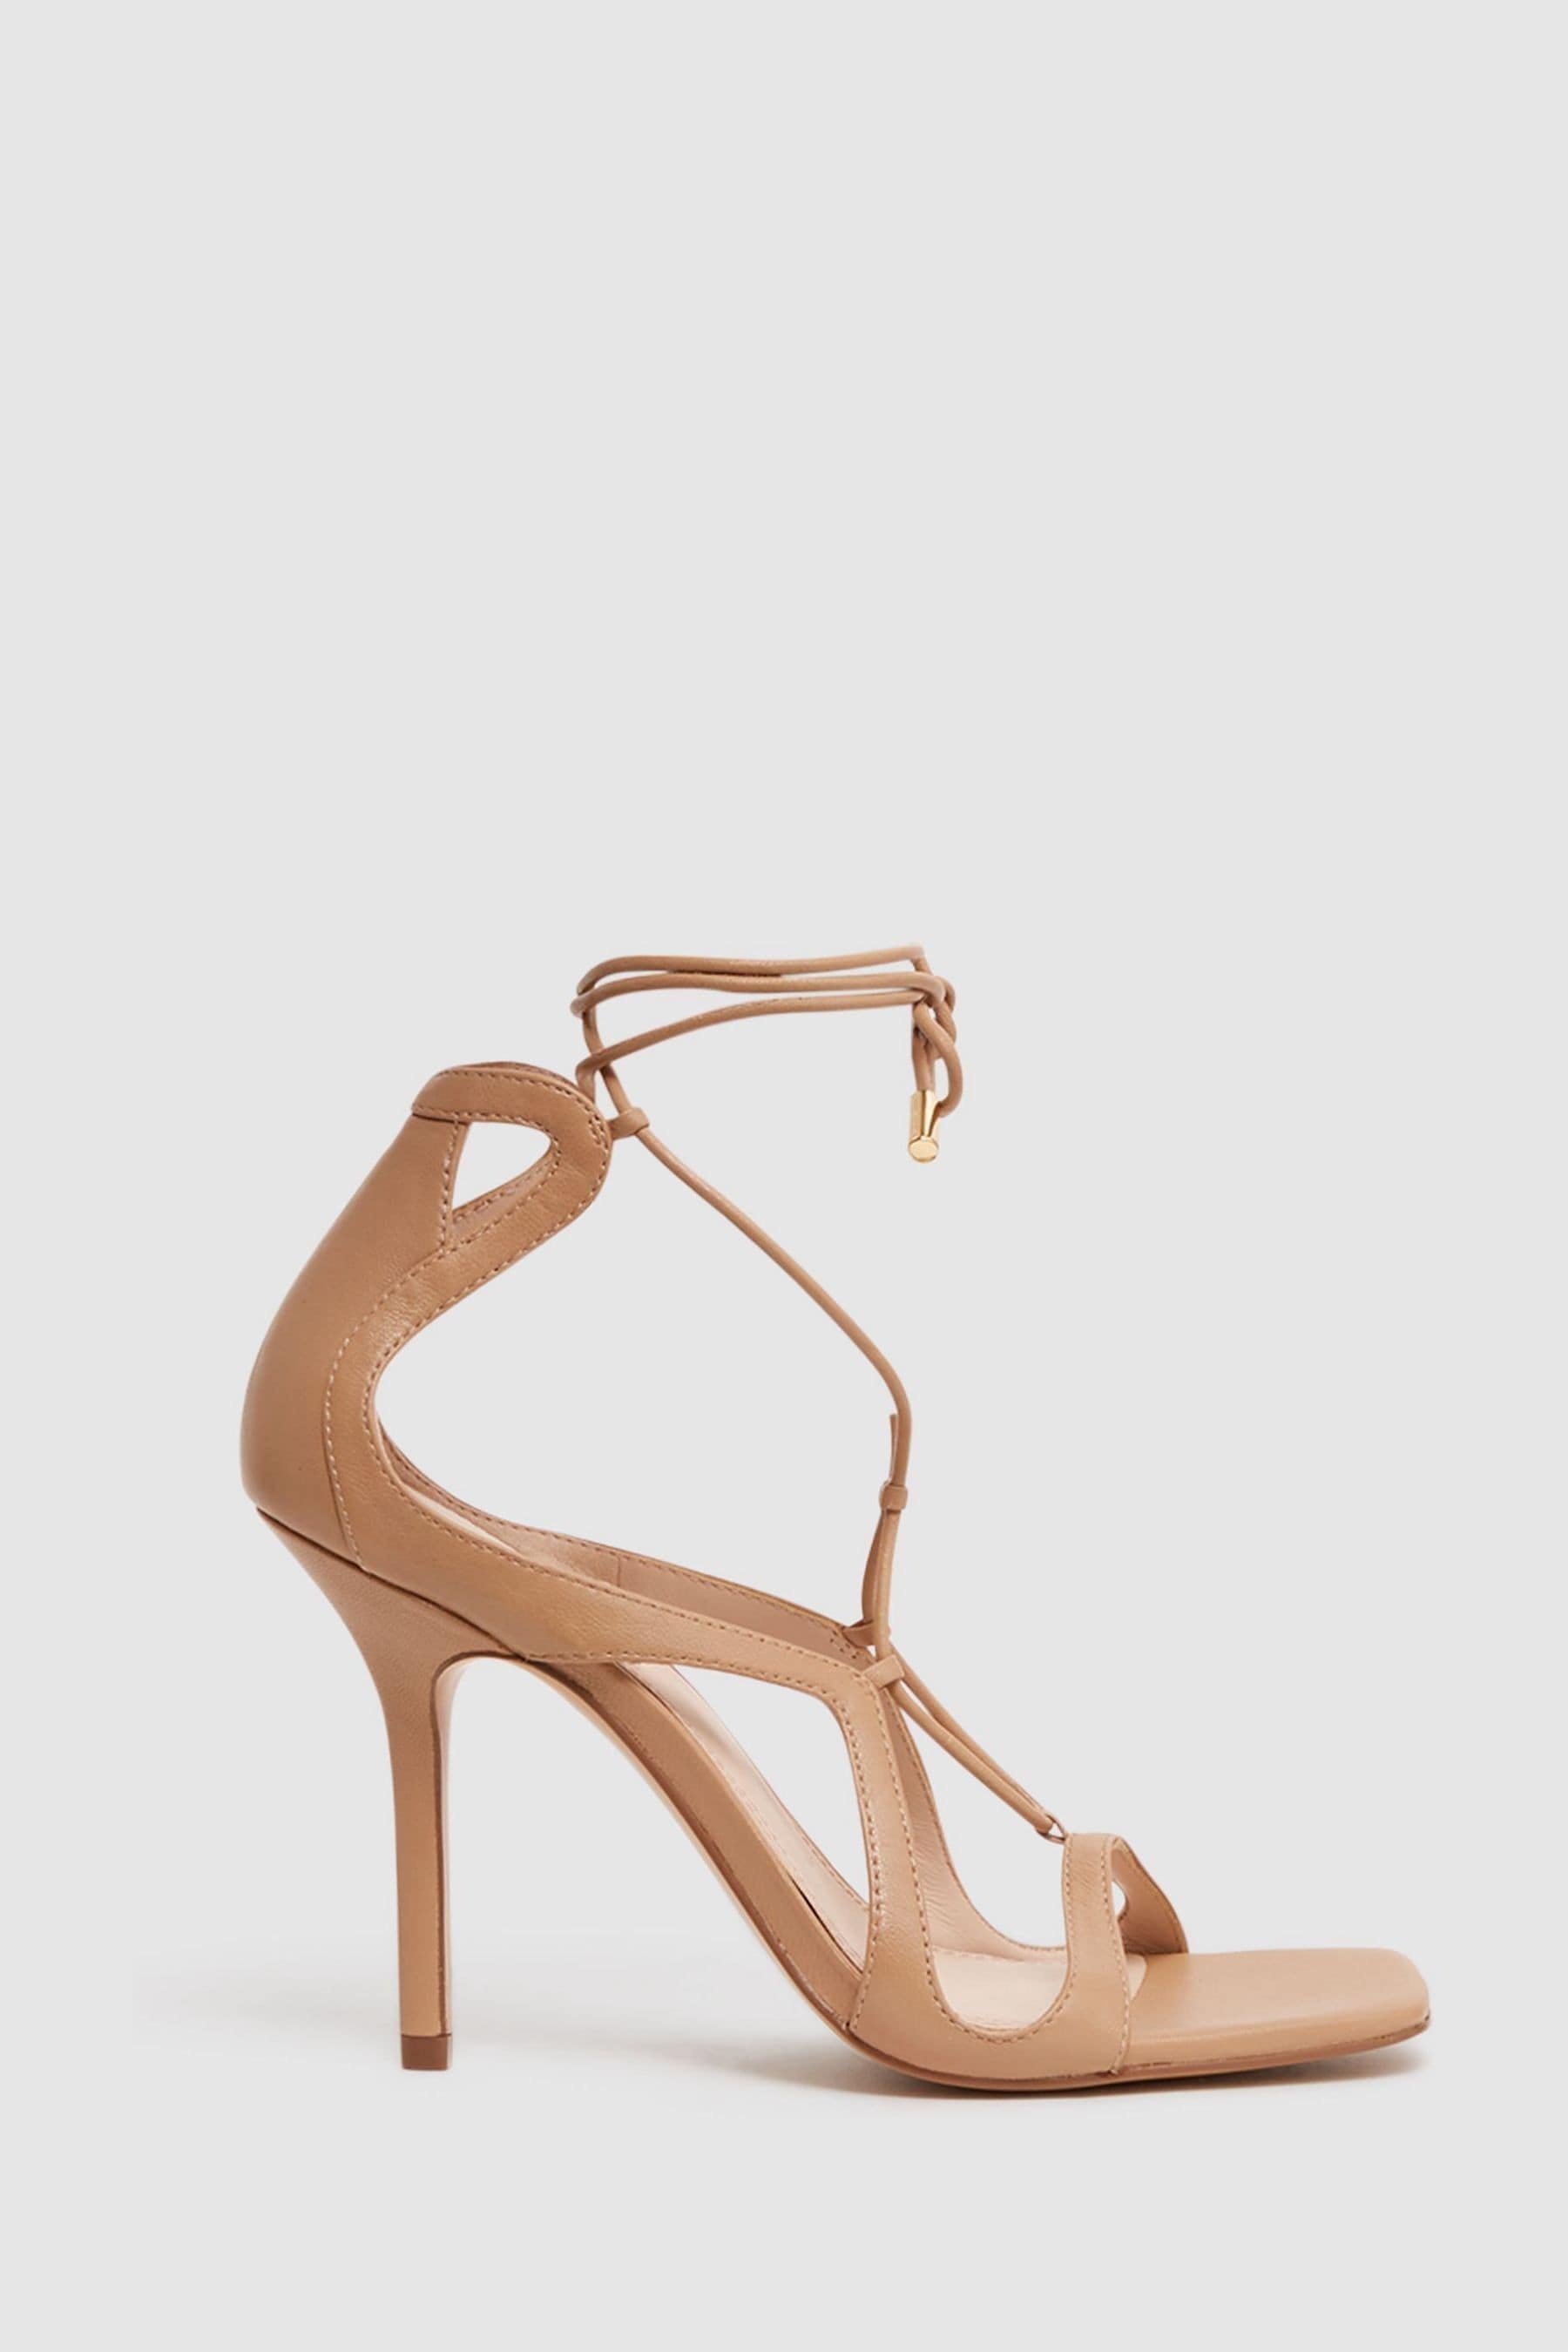 Buy Reiss Kate Leather Strappy High Heel Sandals from Next Ireland